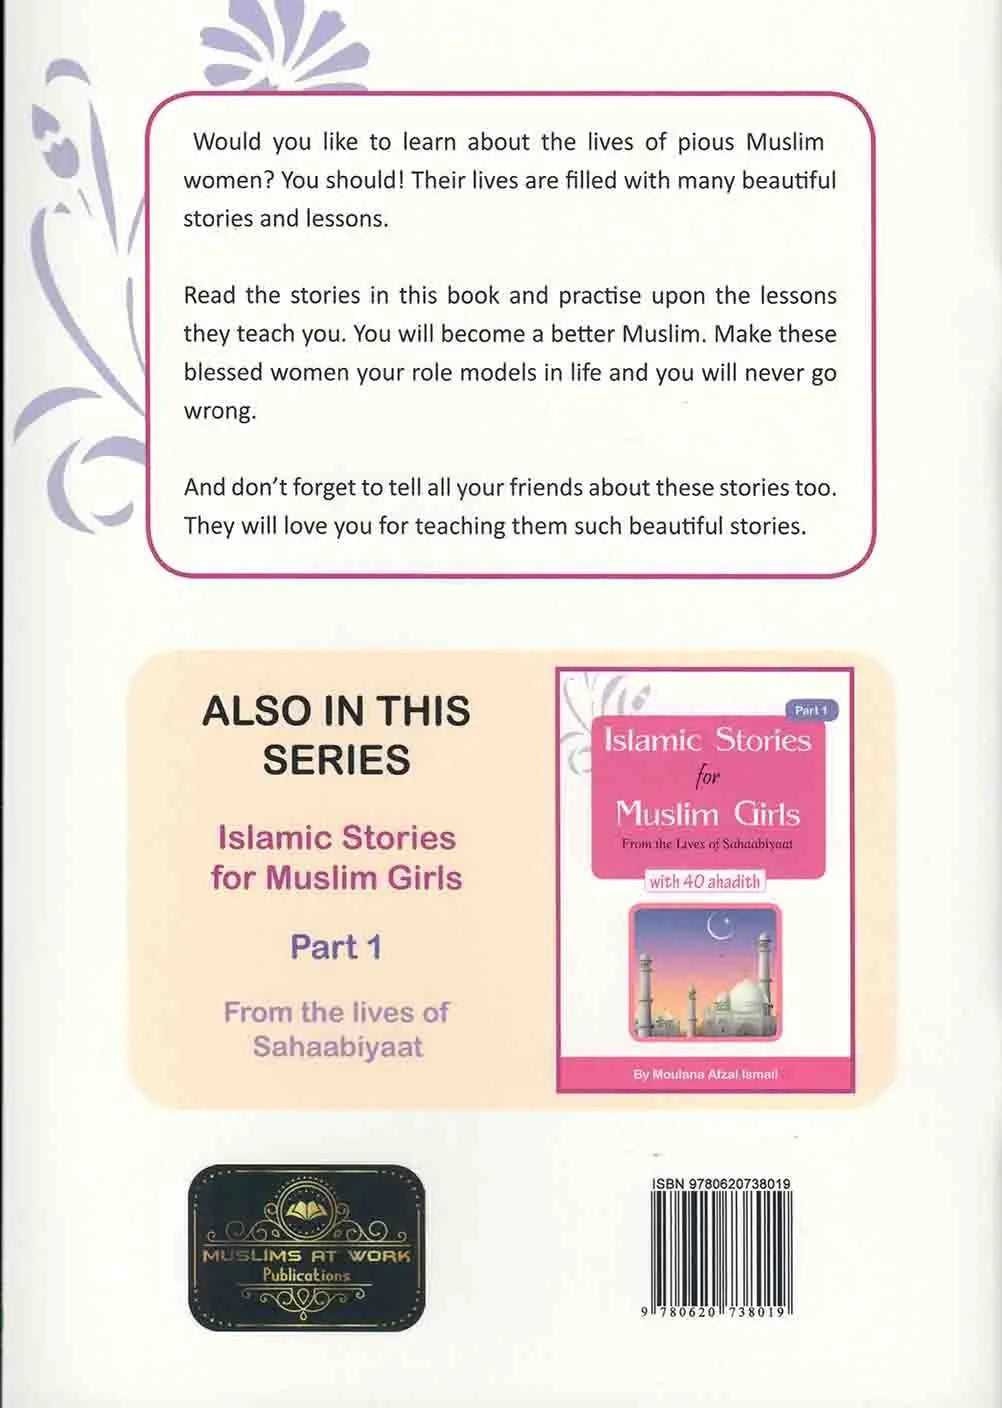 Islamic Stories For Muslim Girls: Part 2 - From The Lives Of Pious Women with 30 lessons